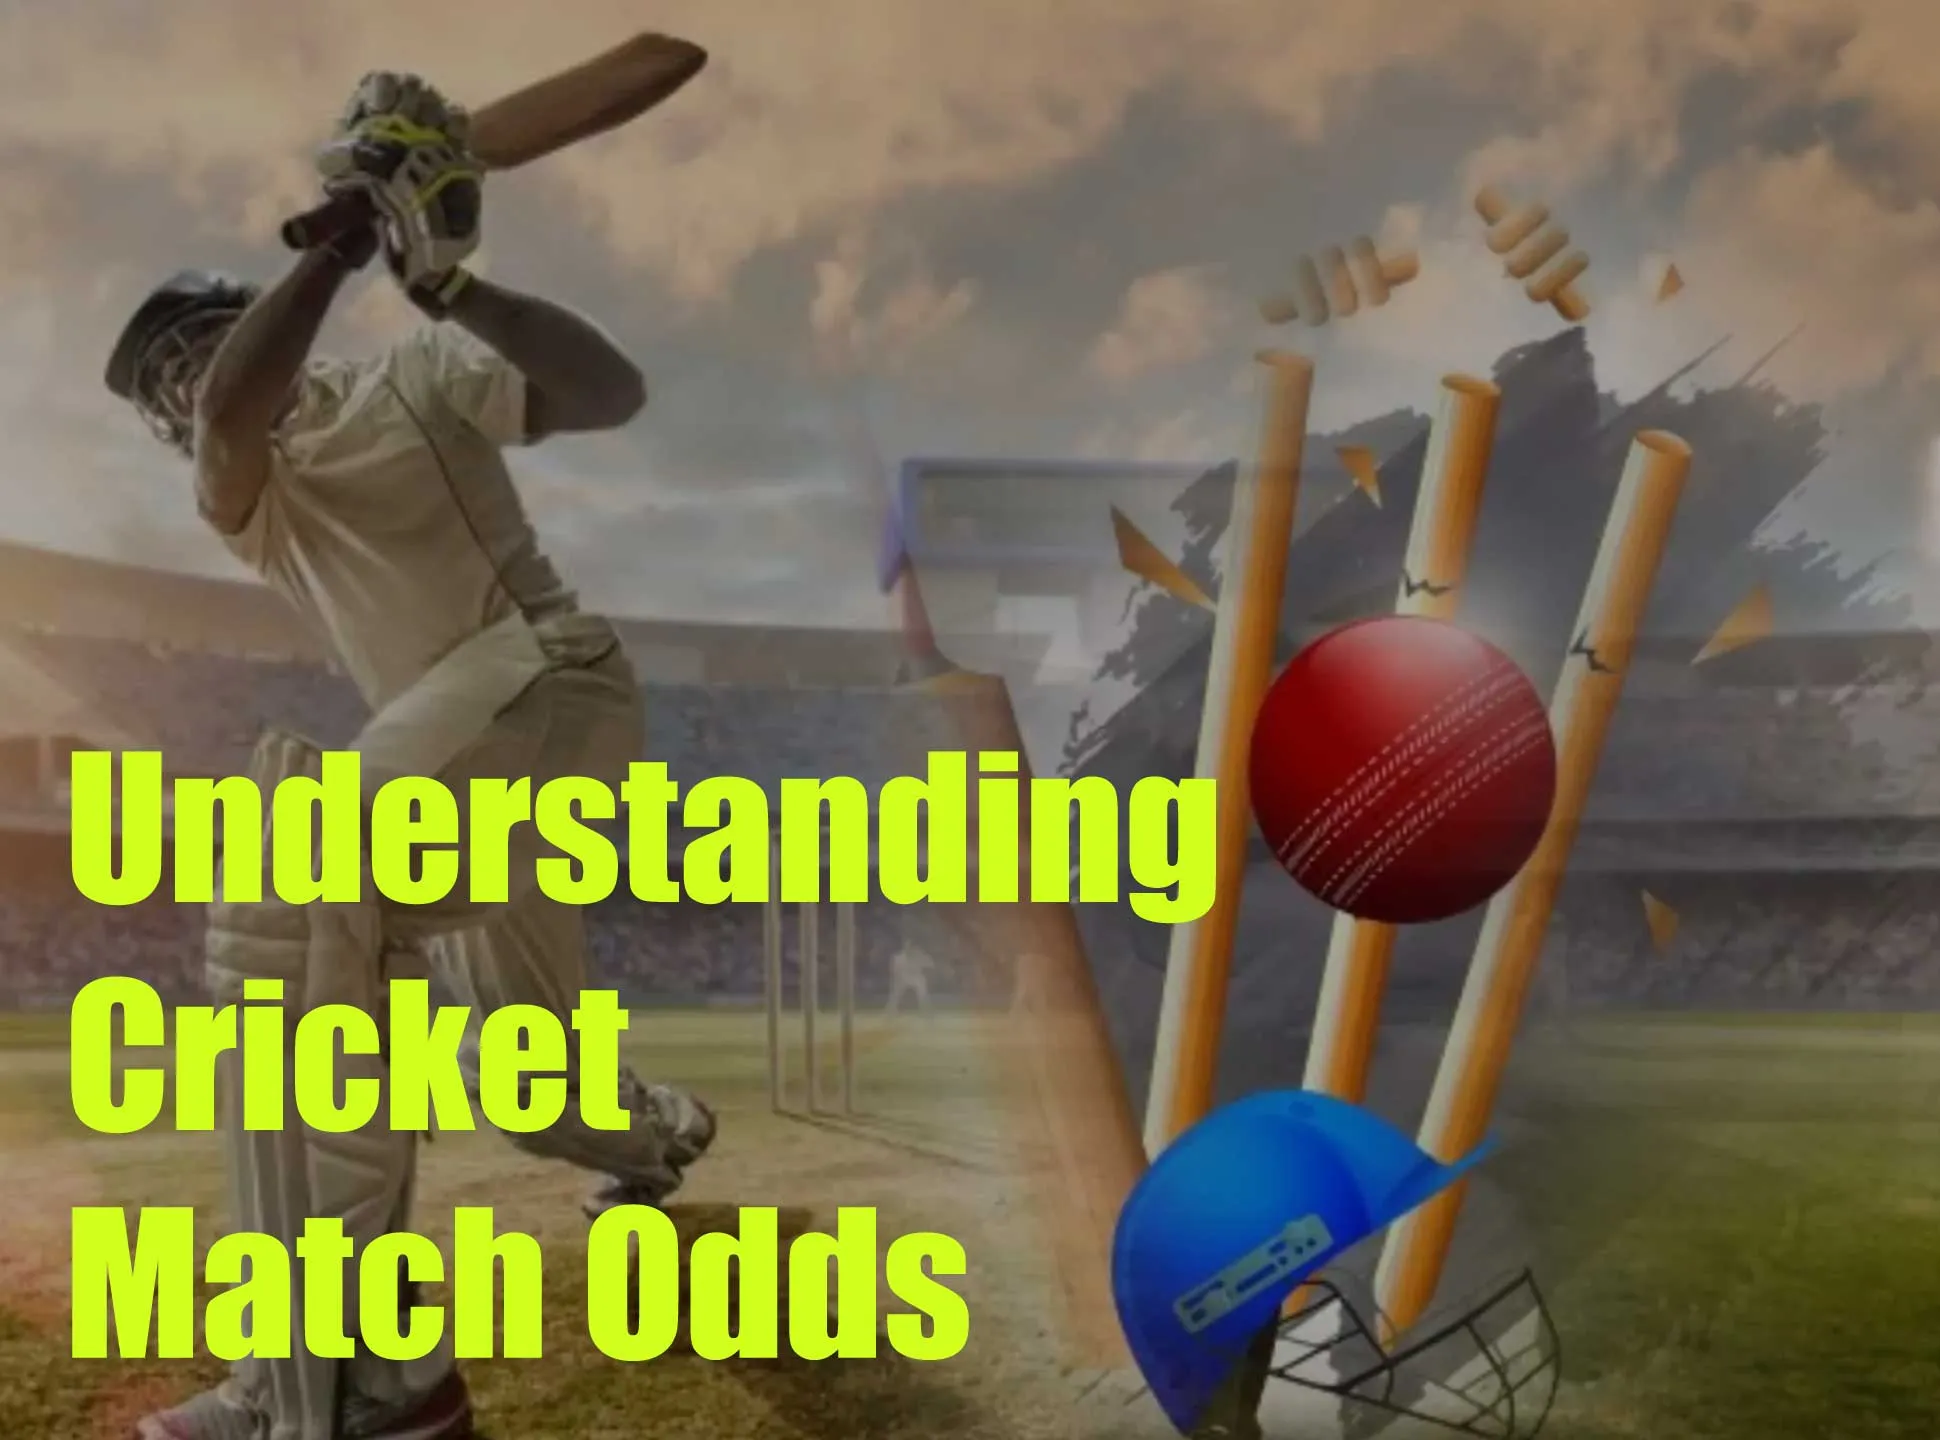 Read this to figure out how cricket betting odds work.